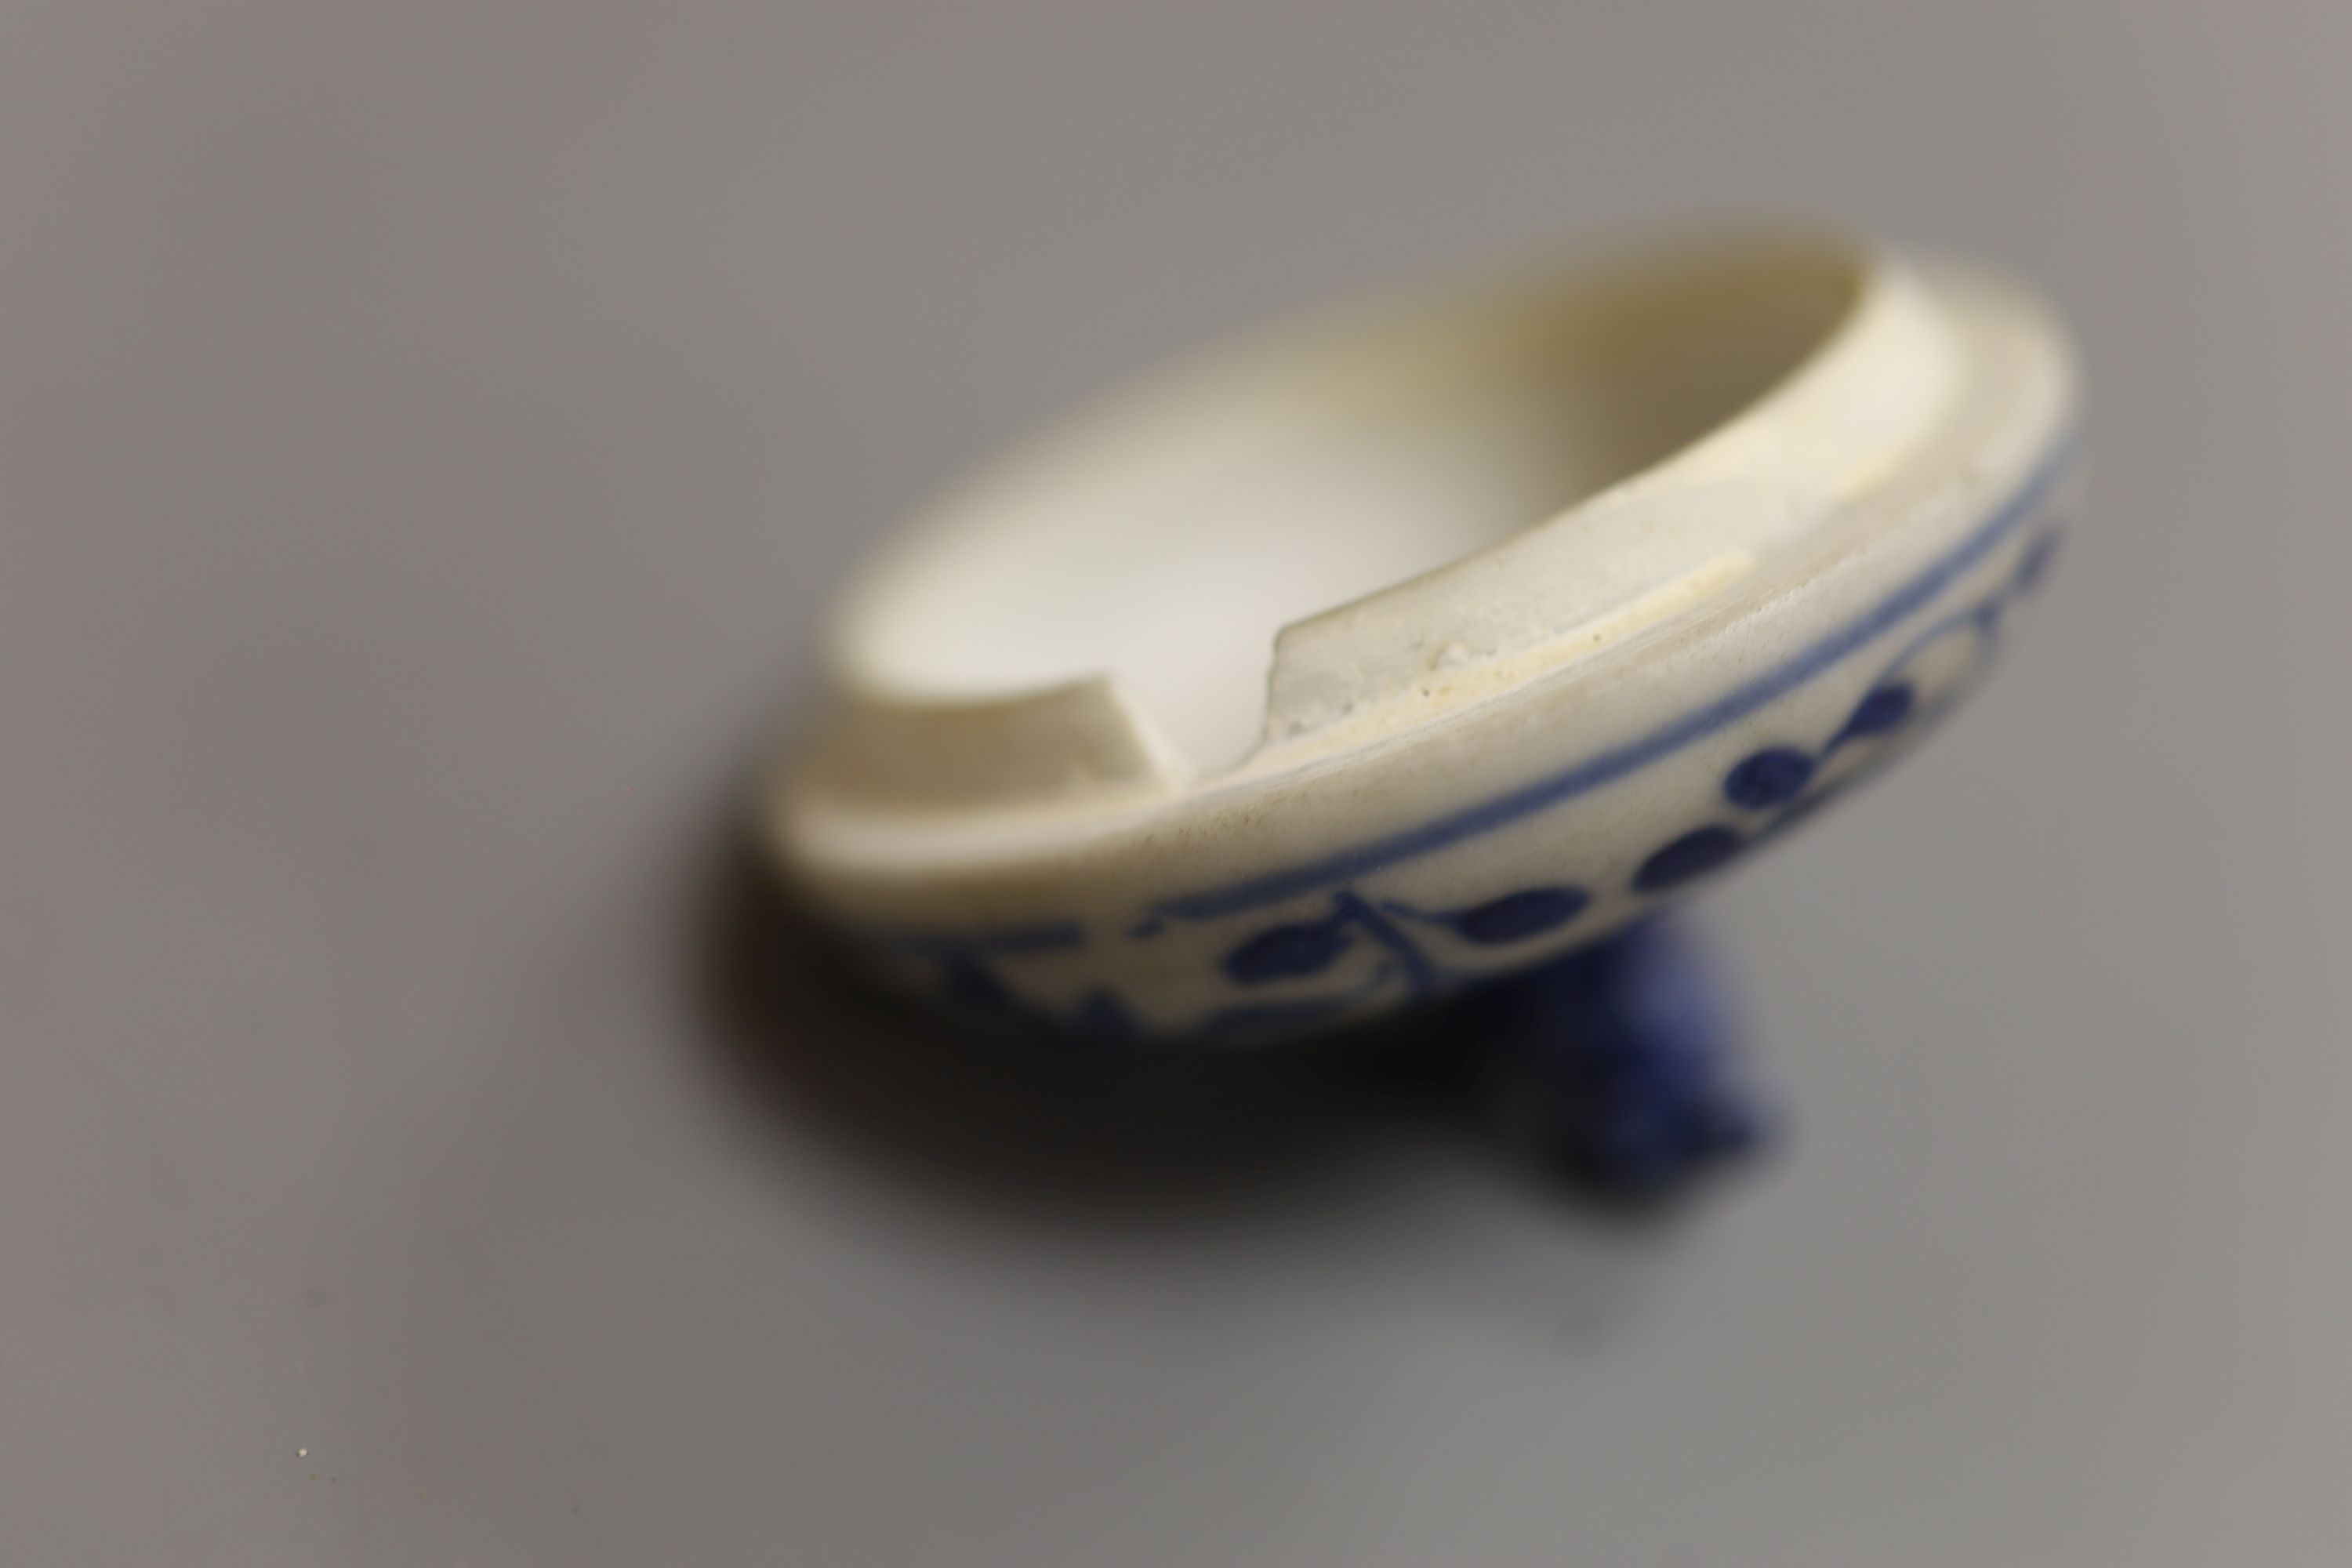 A Chinese Vungtao cargo blue and white mustard pot and cover, height 9cm